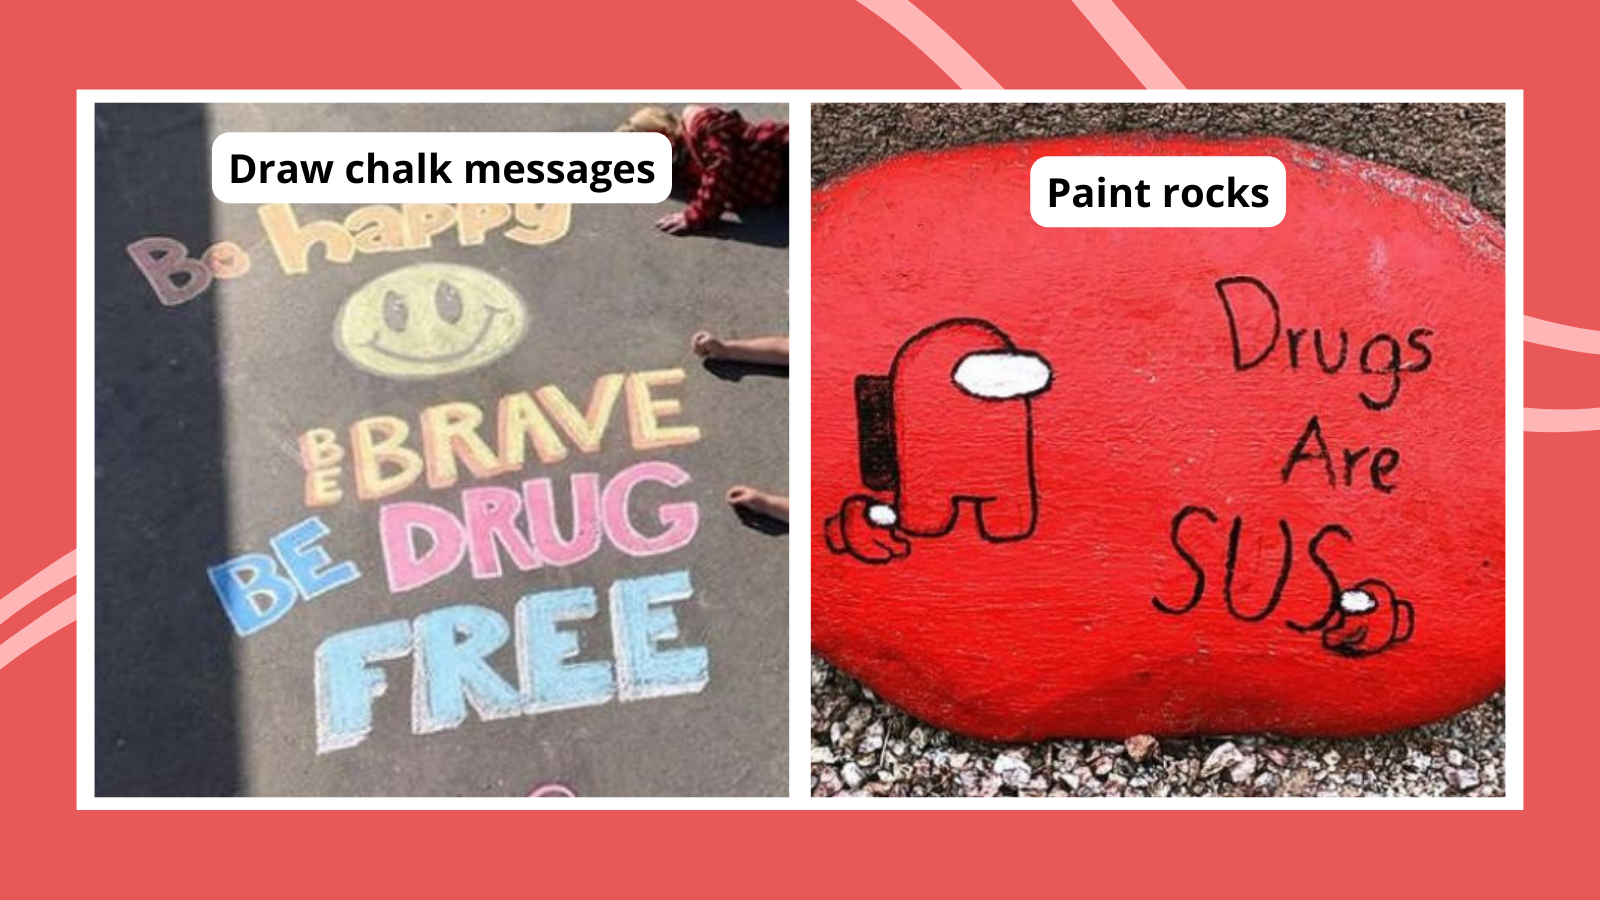 Examples of Red Ribbon Week ideas and activities including drawing chalk messages and painting rocks.